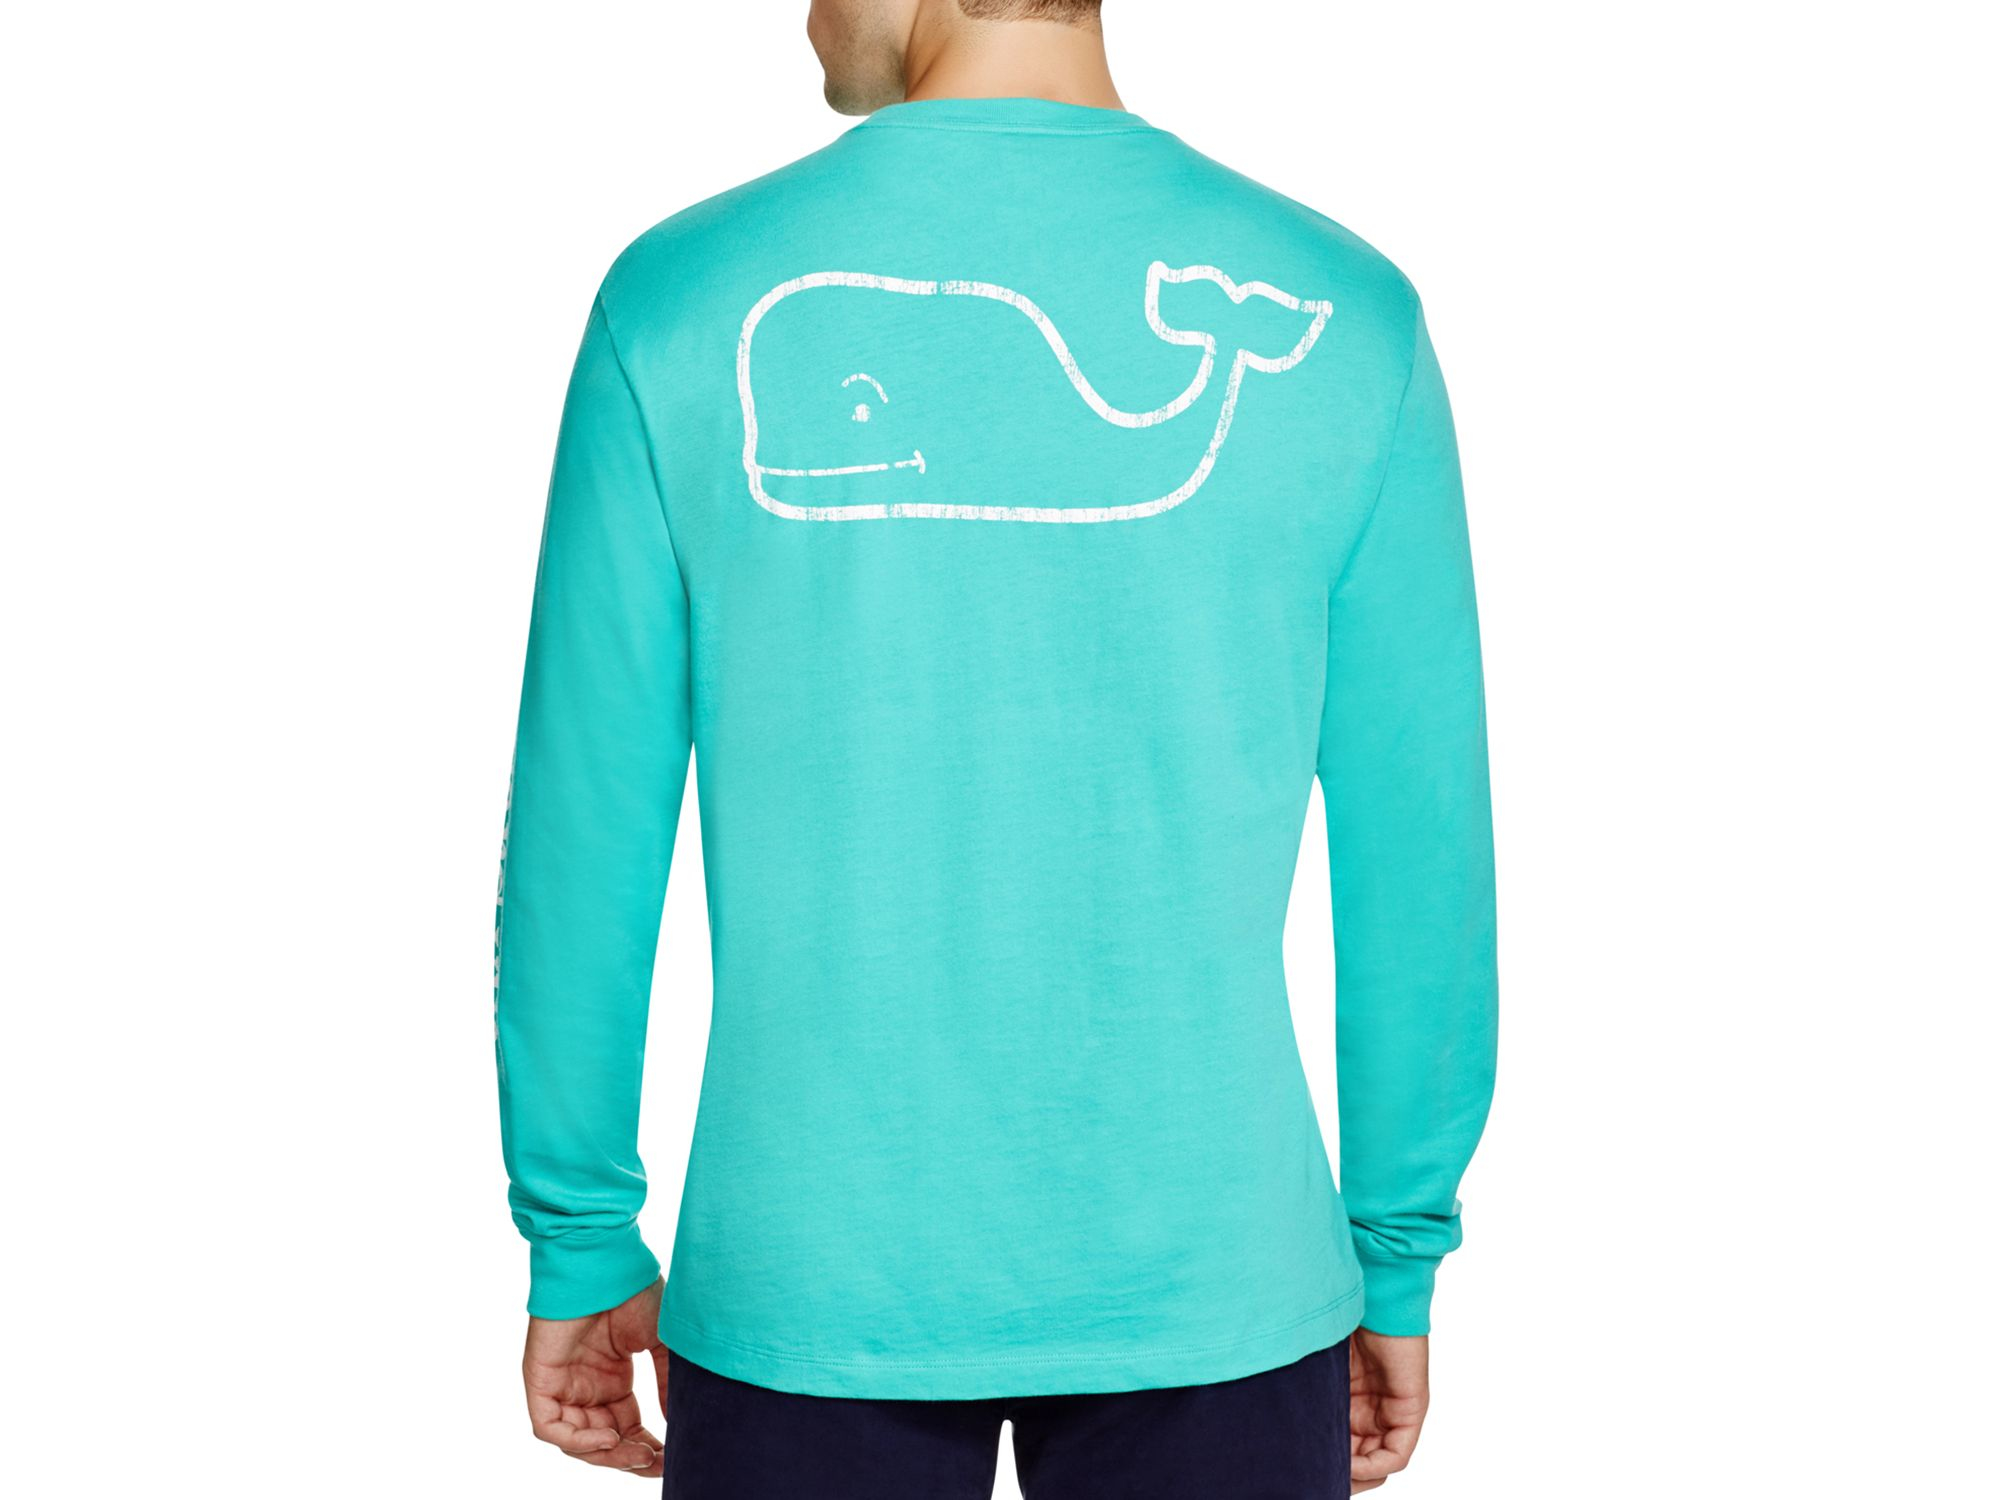 Lyst - Vineyard Vines Whale Graphic Long Sleeve Pocket Tee in Blue for Men